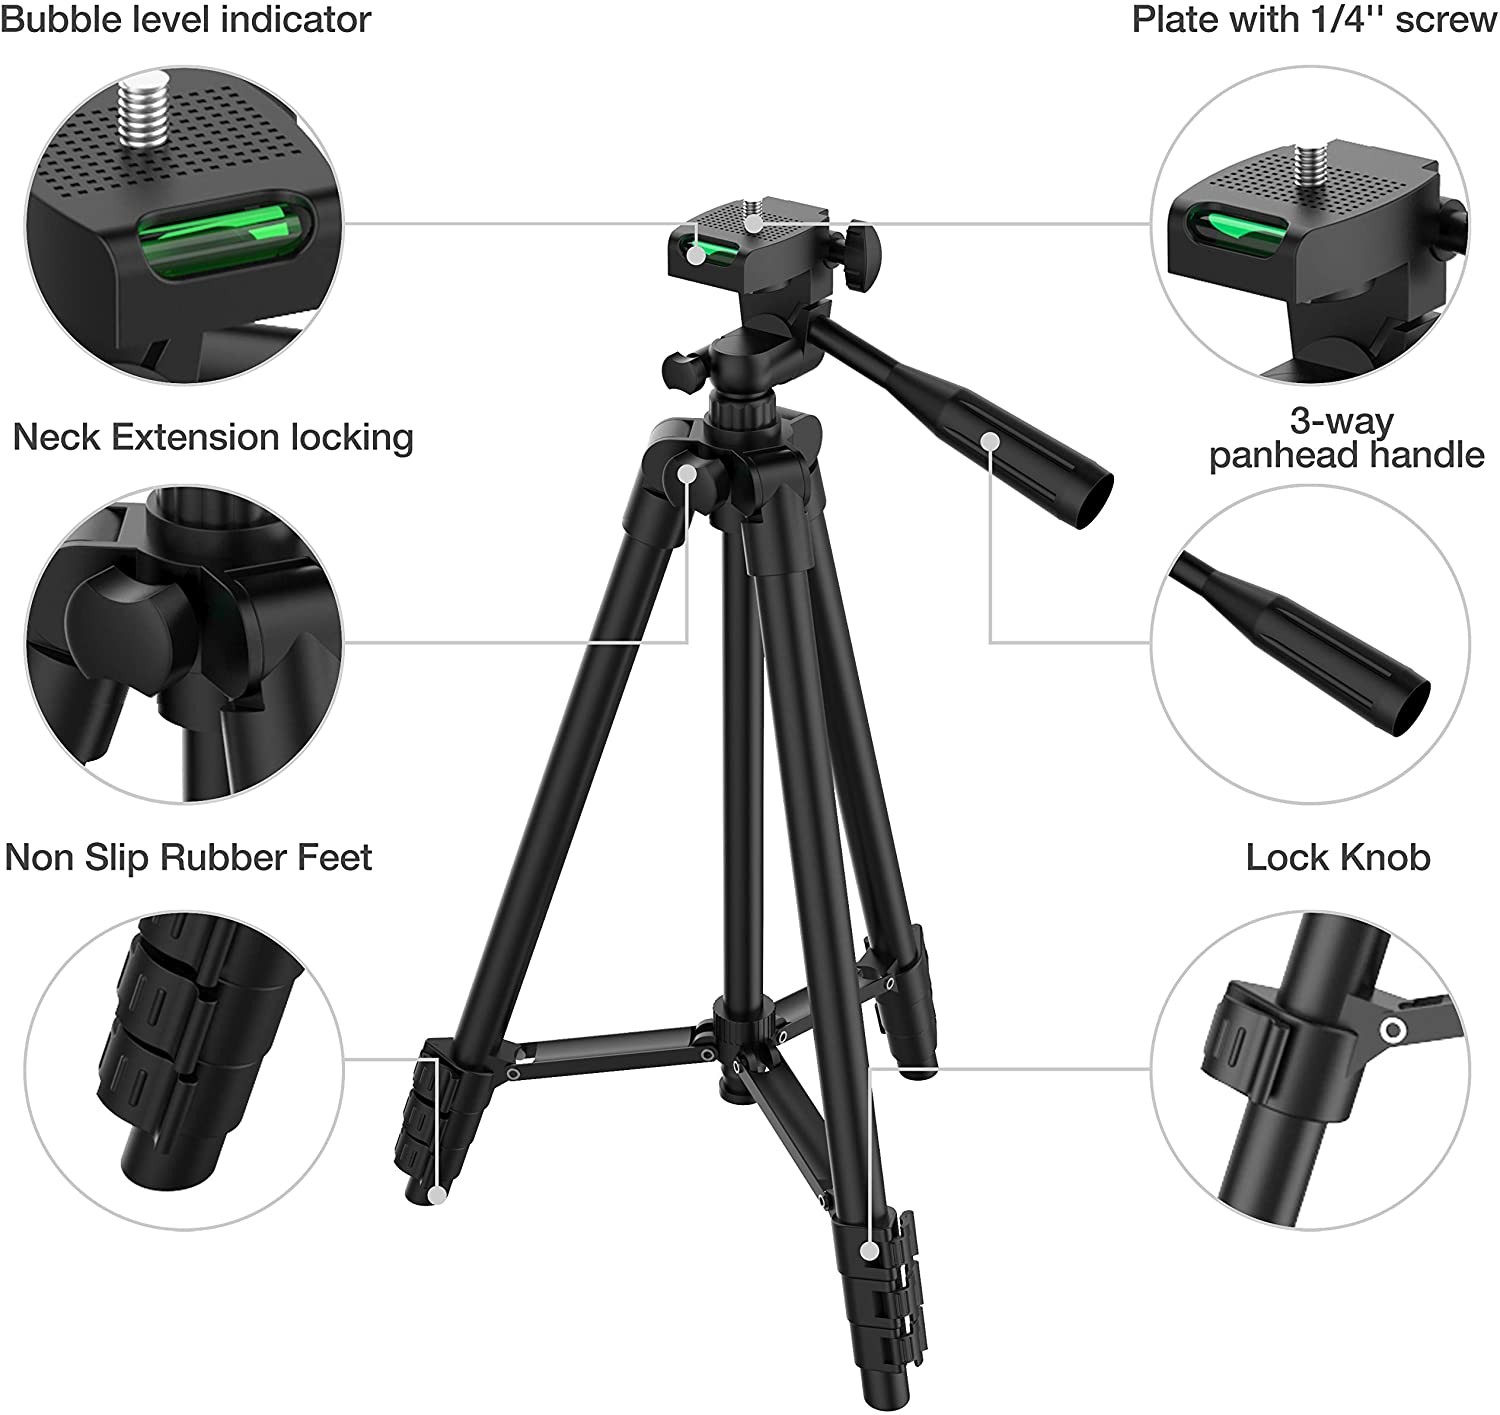 Lightweight Phone Tripod 50-inch/127 cm for Camera with Phone Holder & remote control Gopro, Travel Tripod with Carry Bag